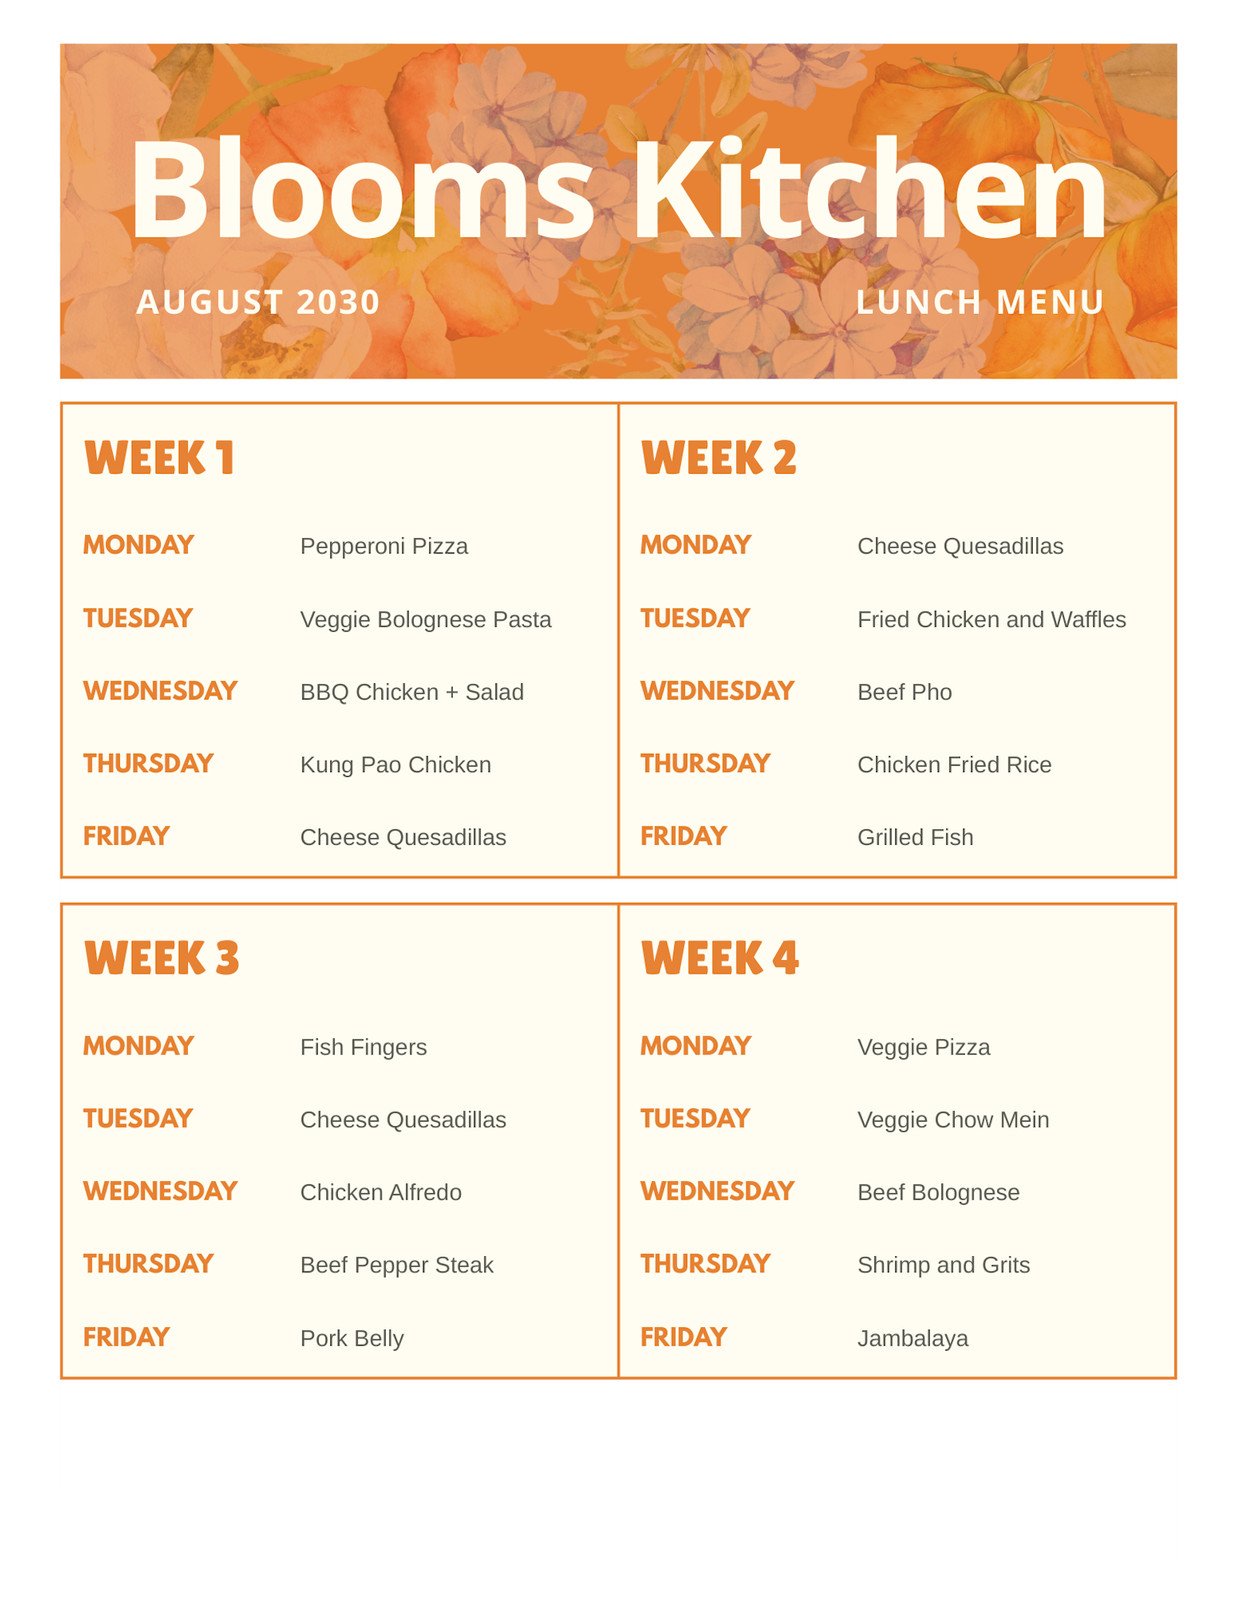 Monthly Meal Planner Doc in Orange Light Yellow Floral Style